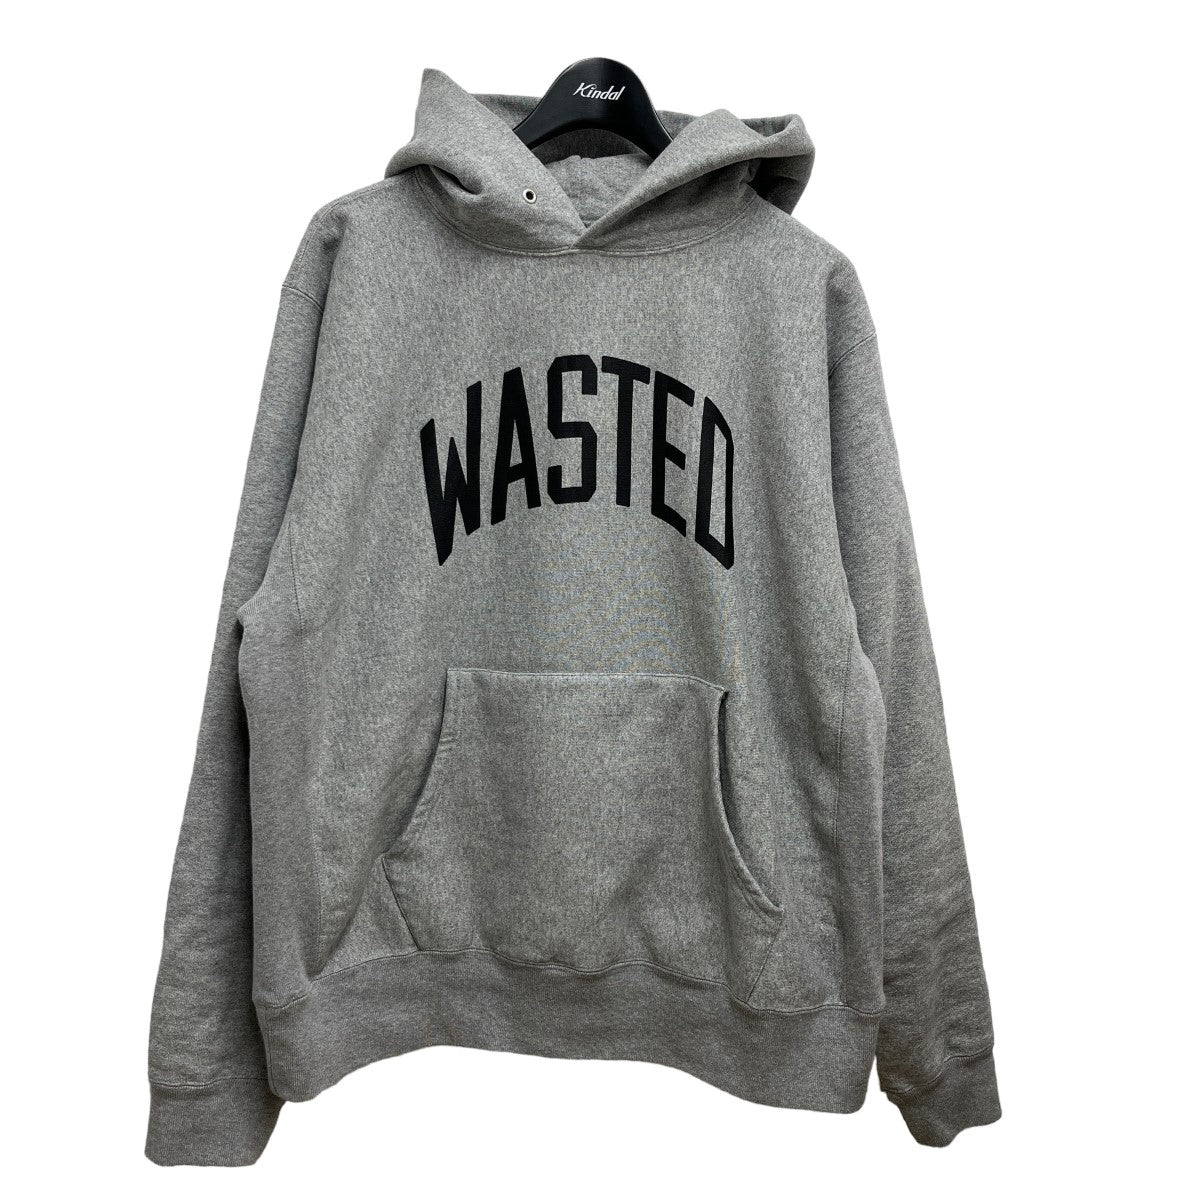 Wasted Youth(ウェイステッド ユース) HEAVY WEIGHT HOODIE パーカー ...